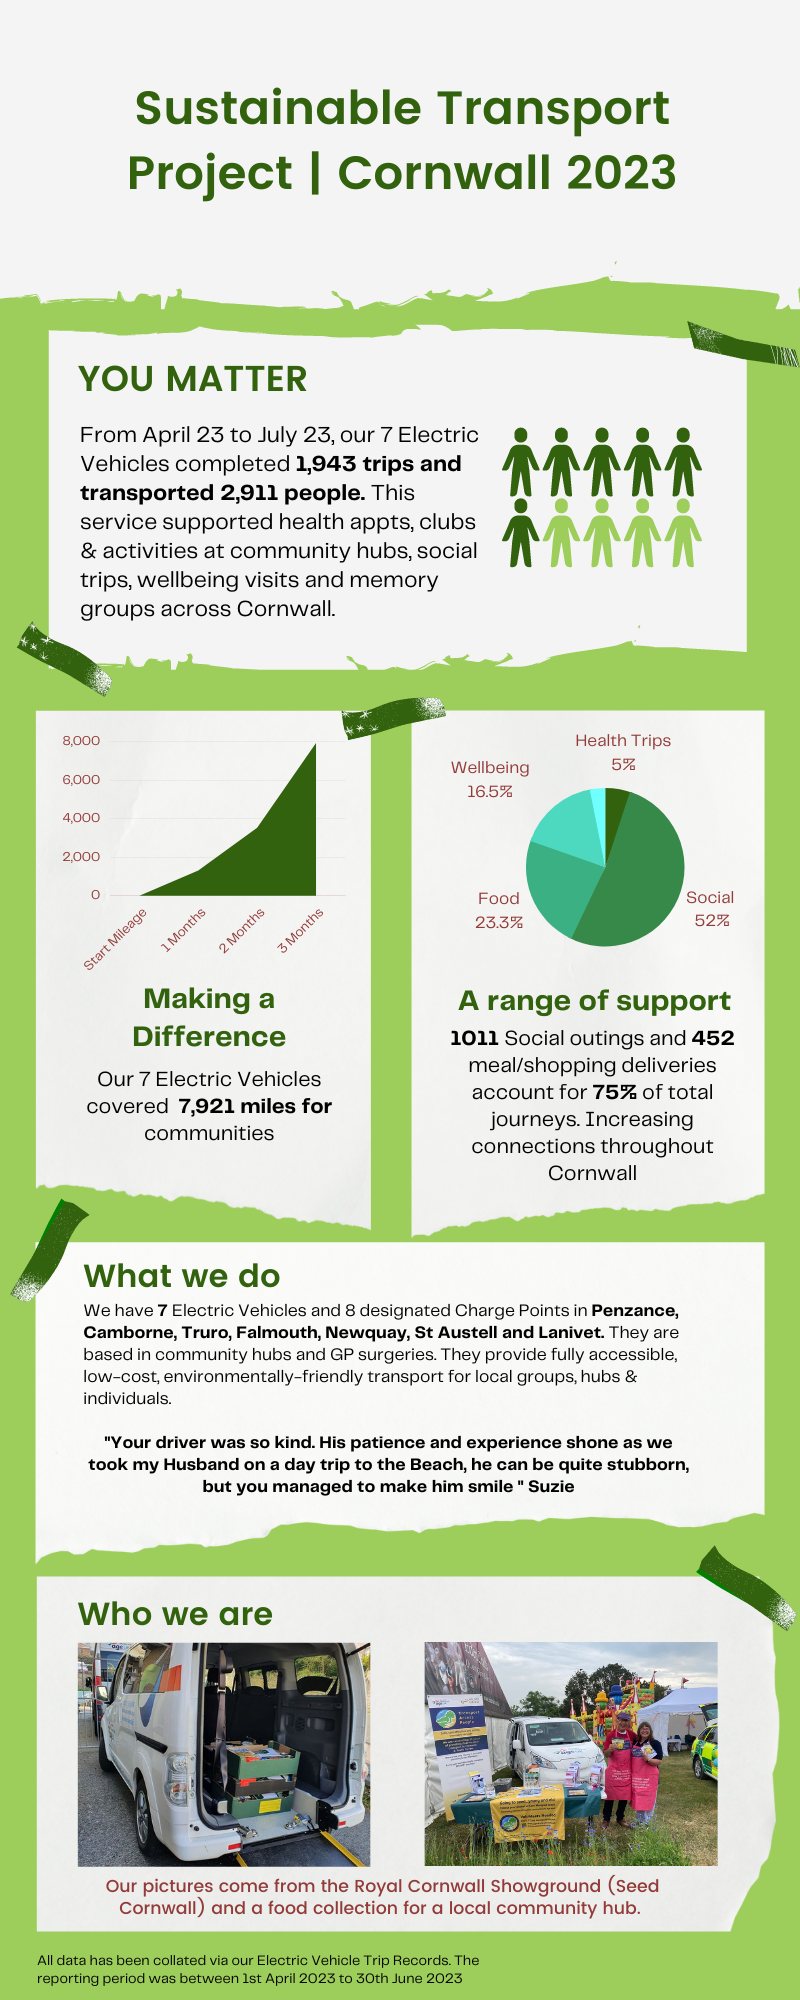 Our Impact 2023 - Q2 Sustainable Transport Project 2023.png